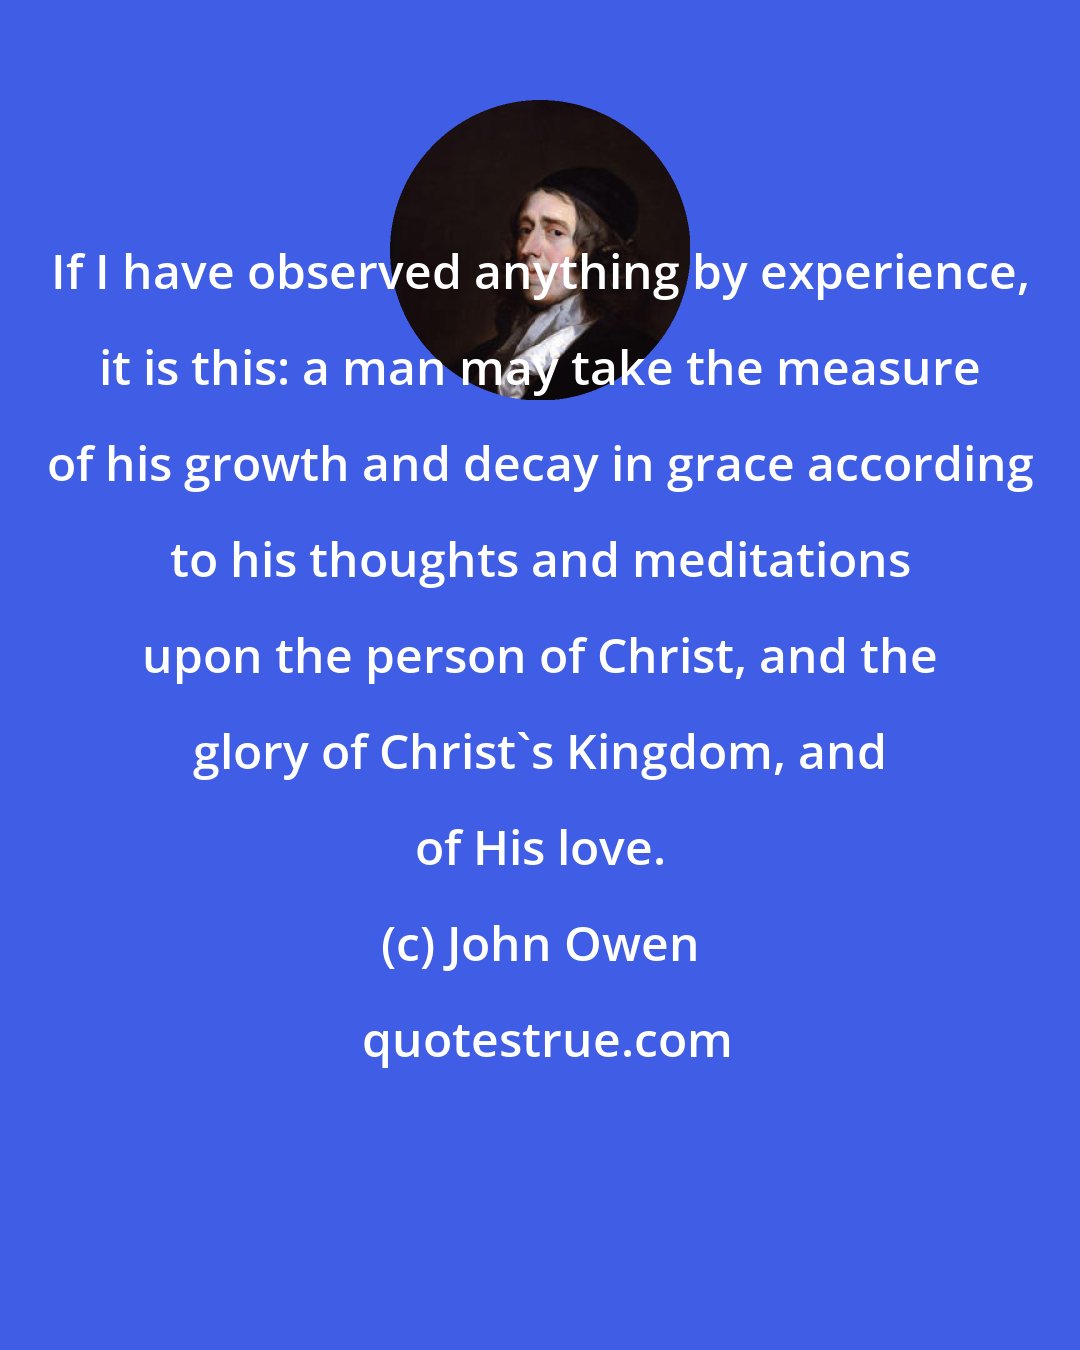 John Owen: If I have observed anything by experience, it is this: a man may take the measure of his growth and decay in grace according to his thoughts and meditations upon the person of Christ, and the glory of Christ's Kingdom, and of His love.